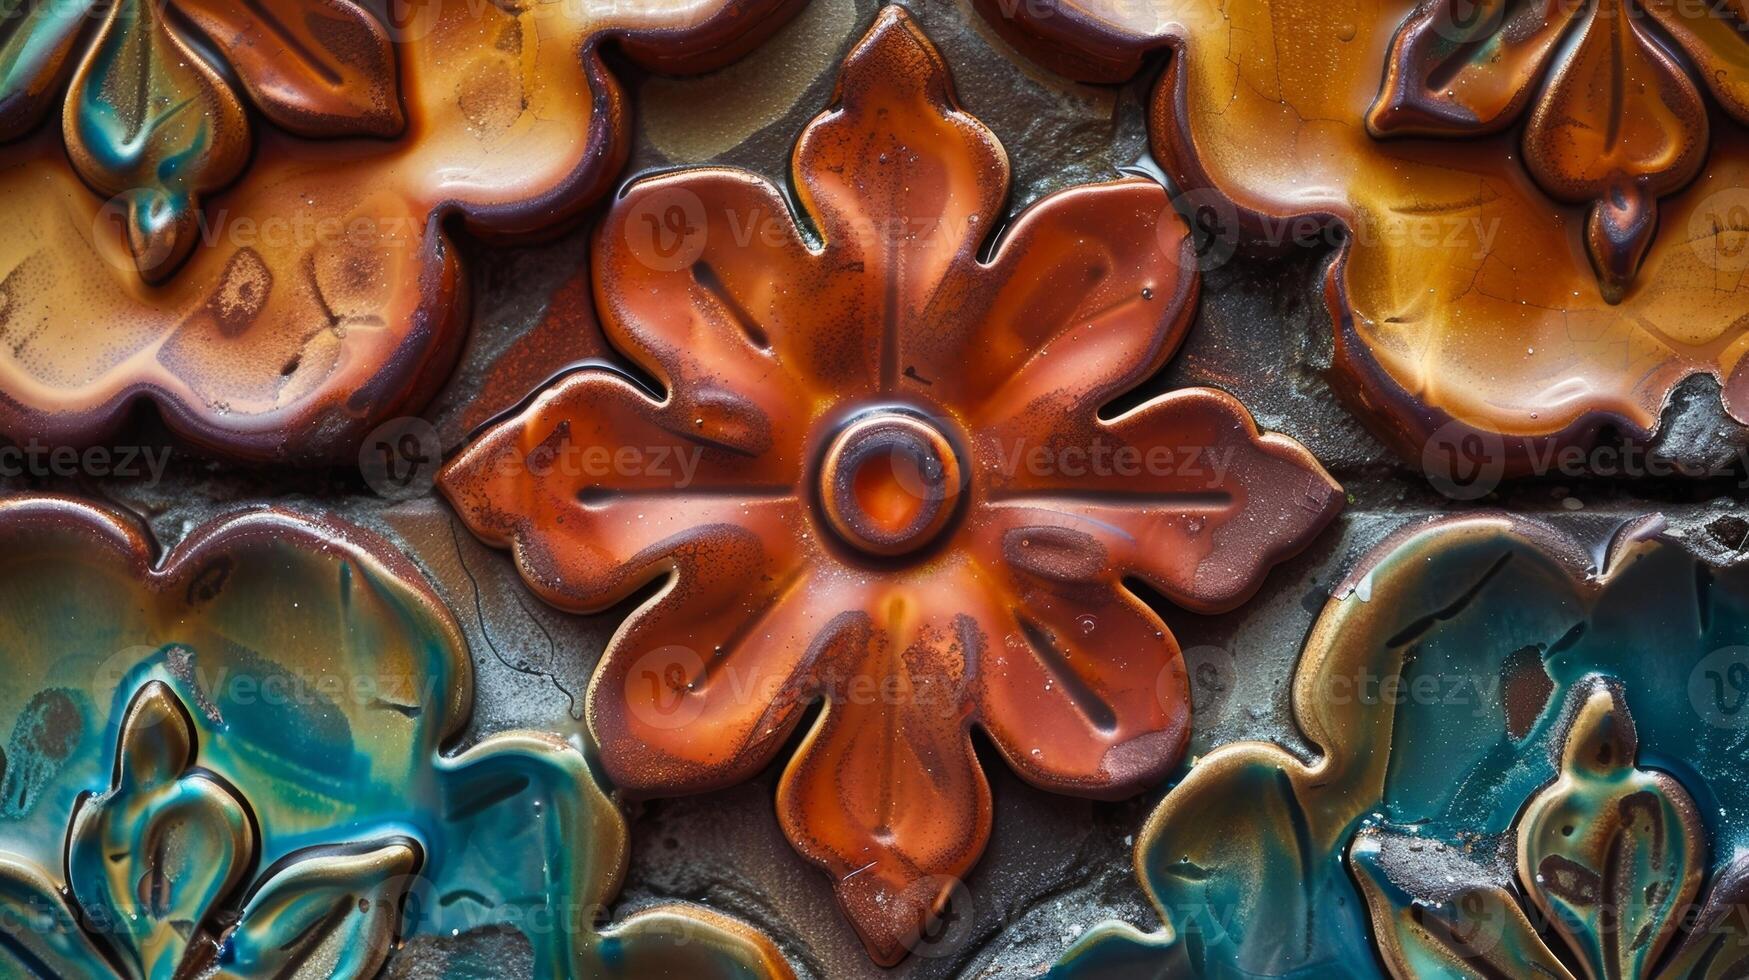 A closeup shot of a clay relief tile in its fired form showing the rich and vibrant colors that can be achieved through careful glazing and firing. photo